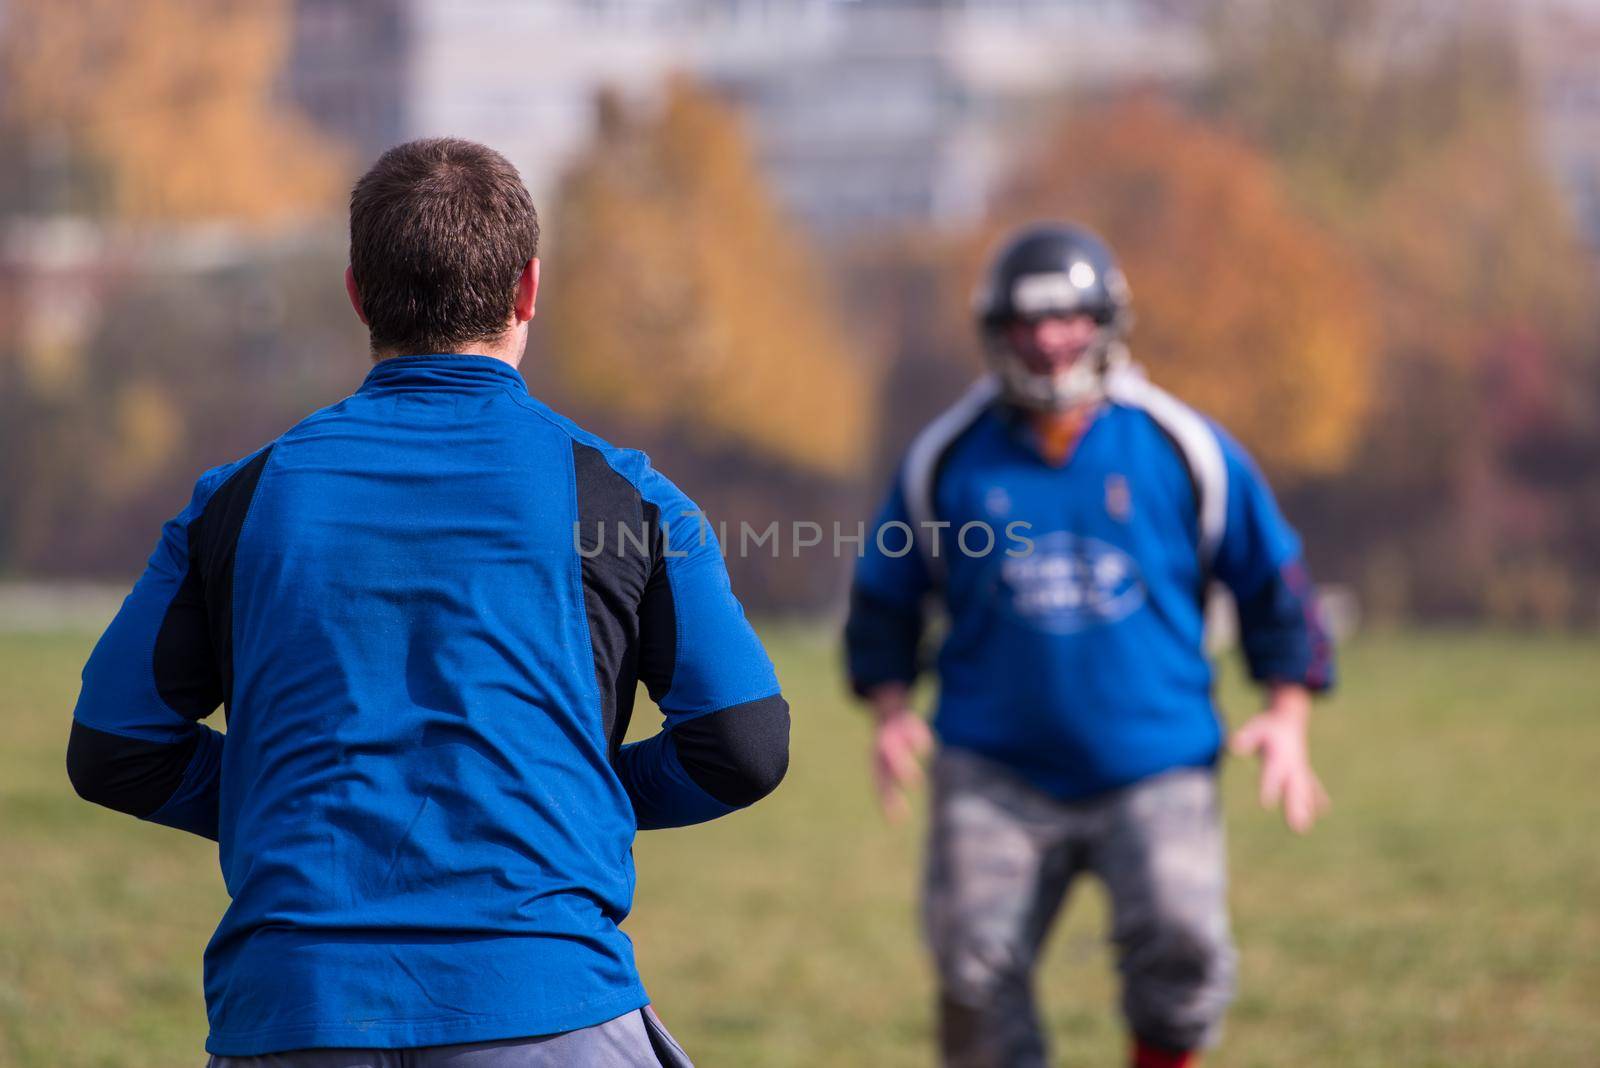 Team coach throwing the ball into the group of young american football players in action during the training at the field